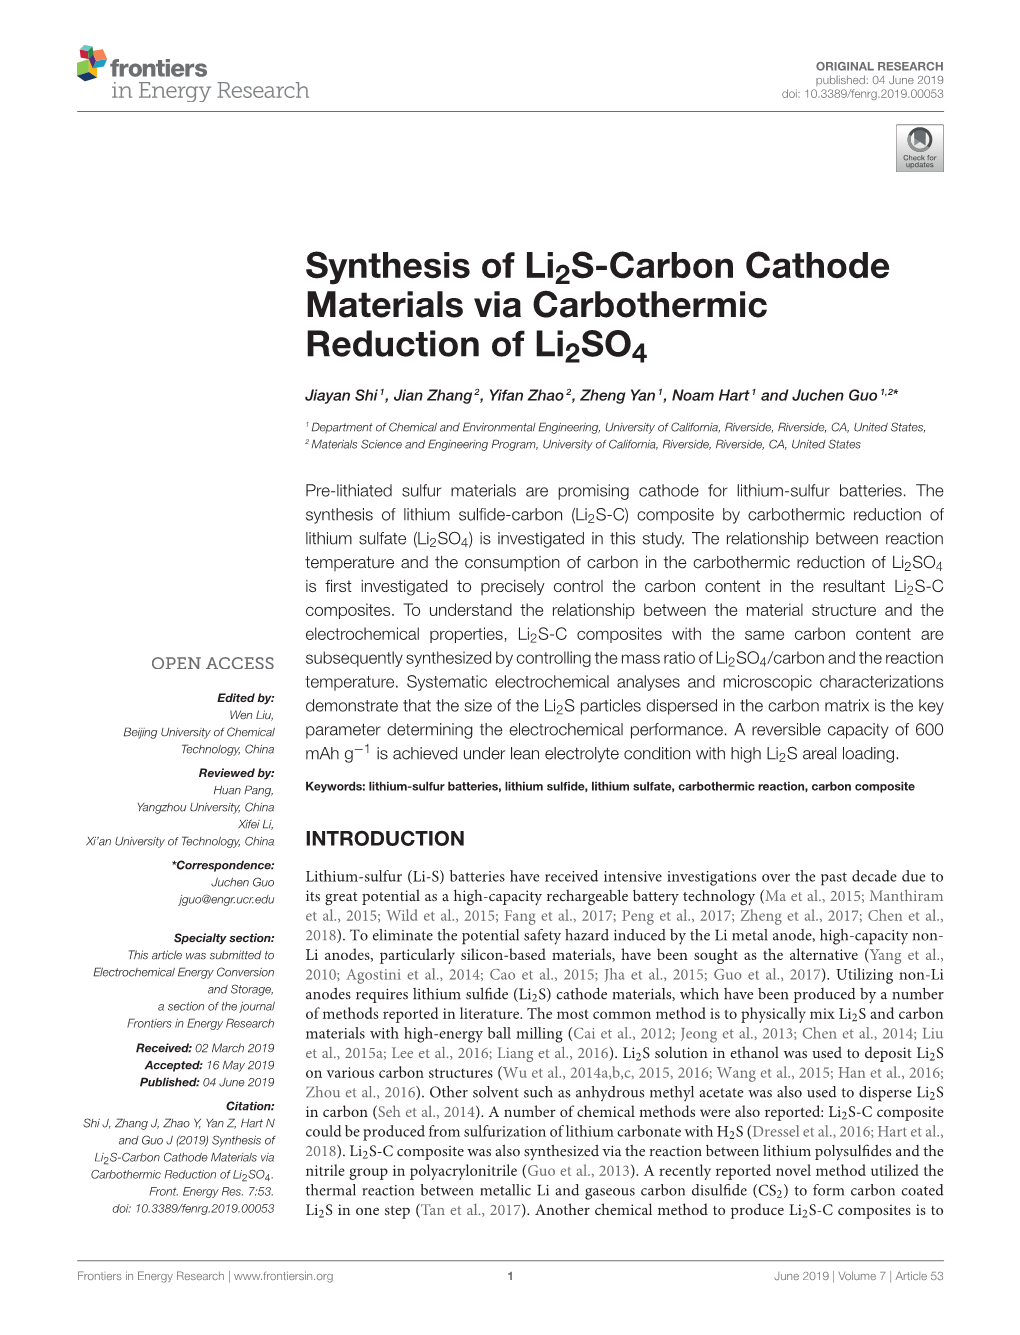 Synthesis of Li2s-Carbon Cathode Materials Via Carbothermic Reduction of Li2so4